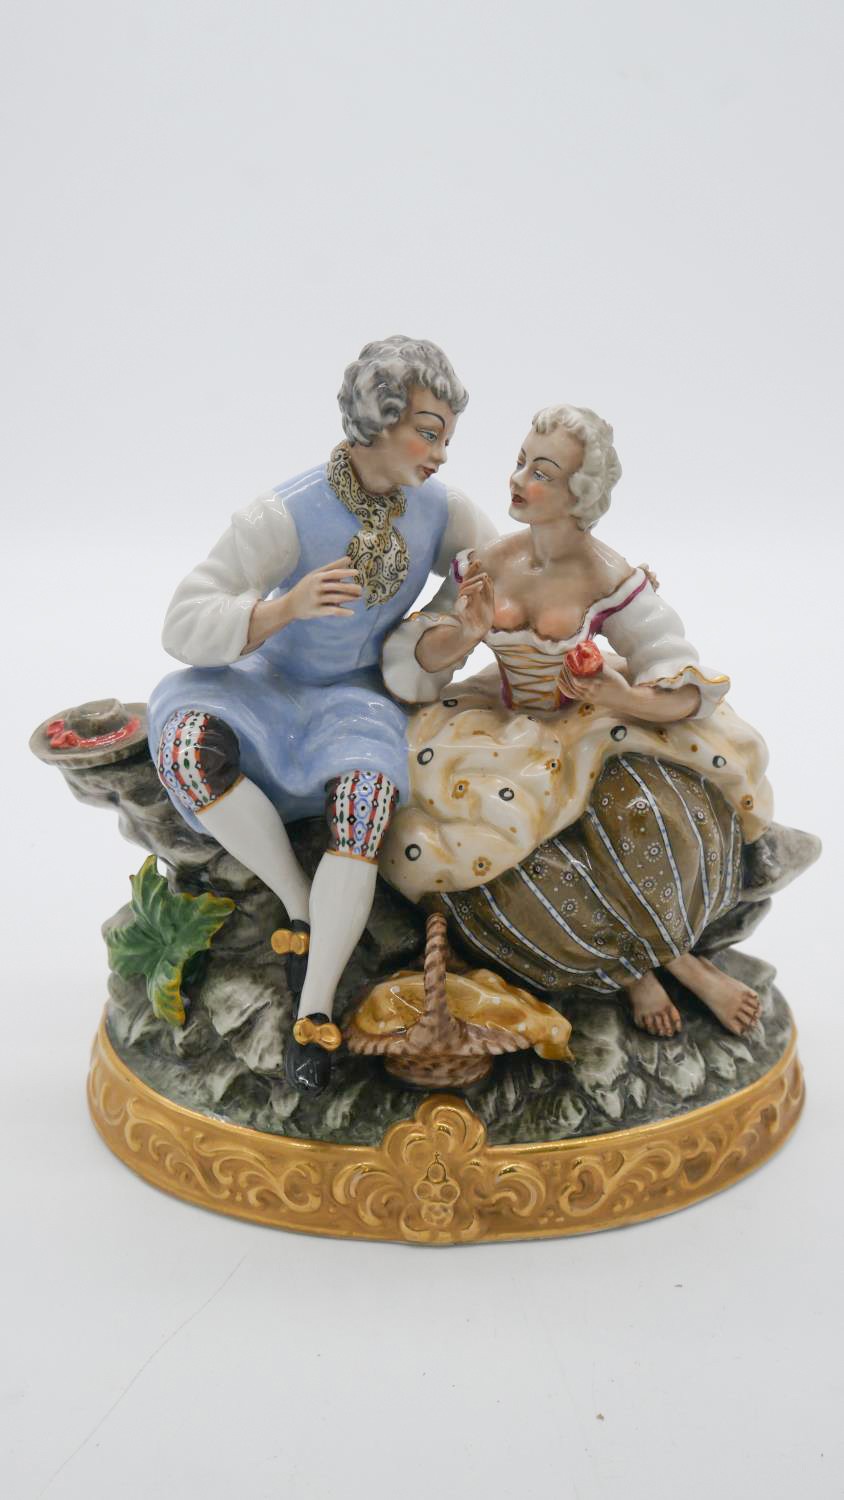 A hand painted porcelain figure group of a pair of lovers seated on a rocky outcrop with picnic